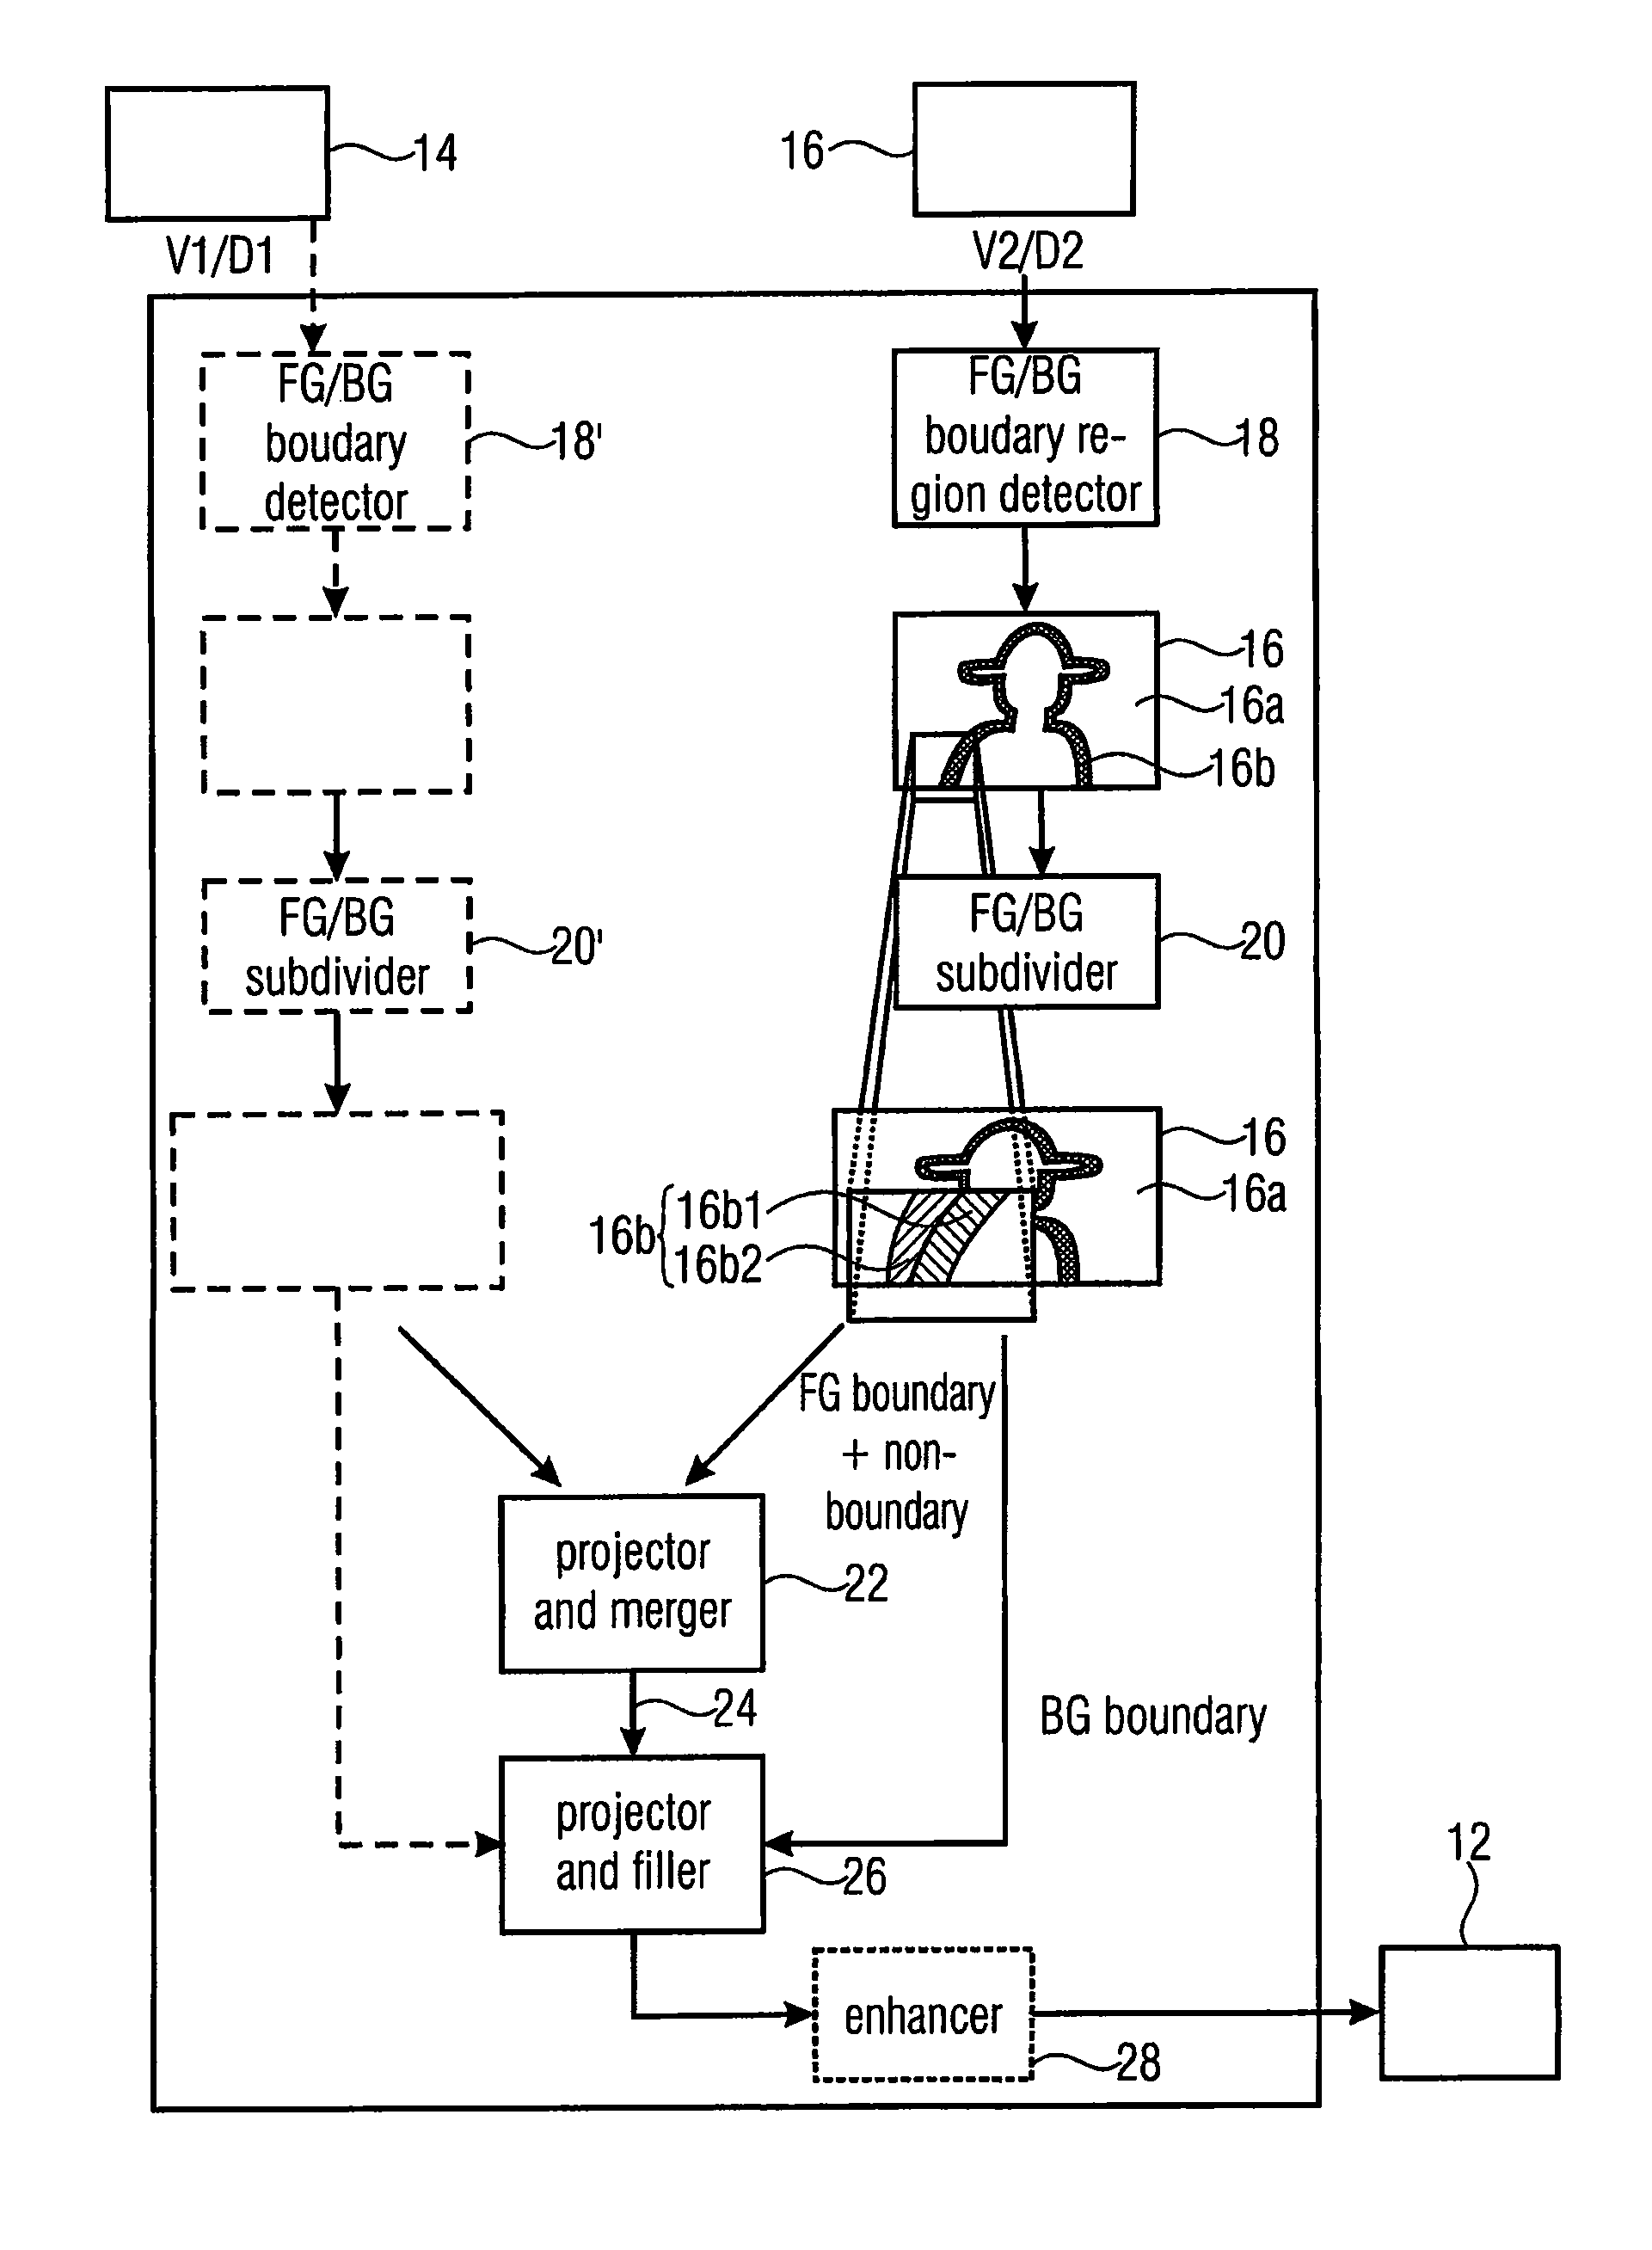 Intermediate view synthesis and multi-view data signal extraction